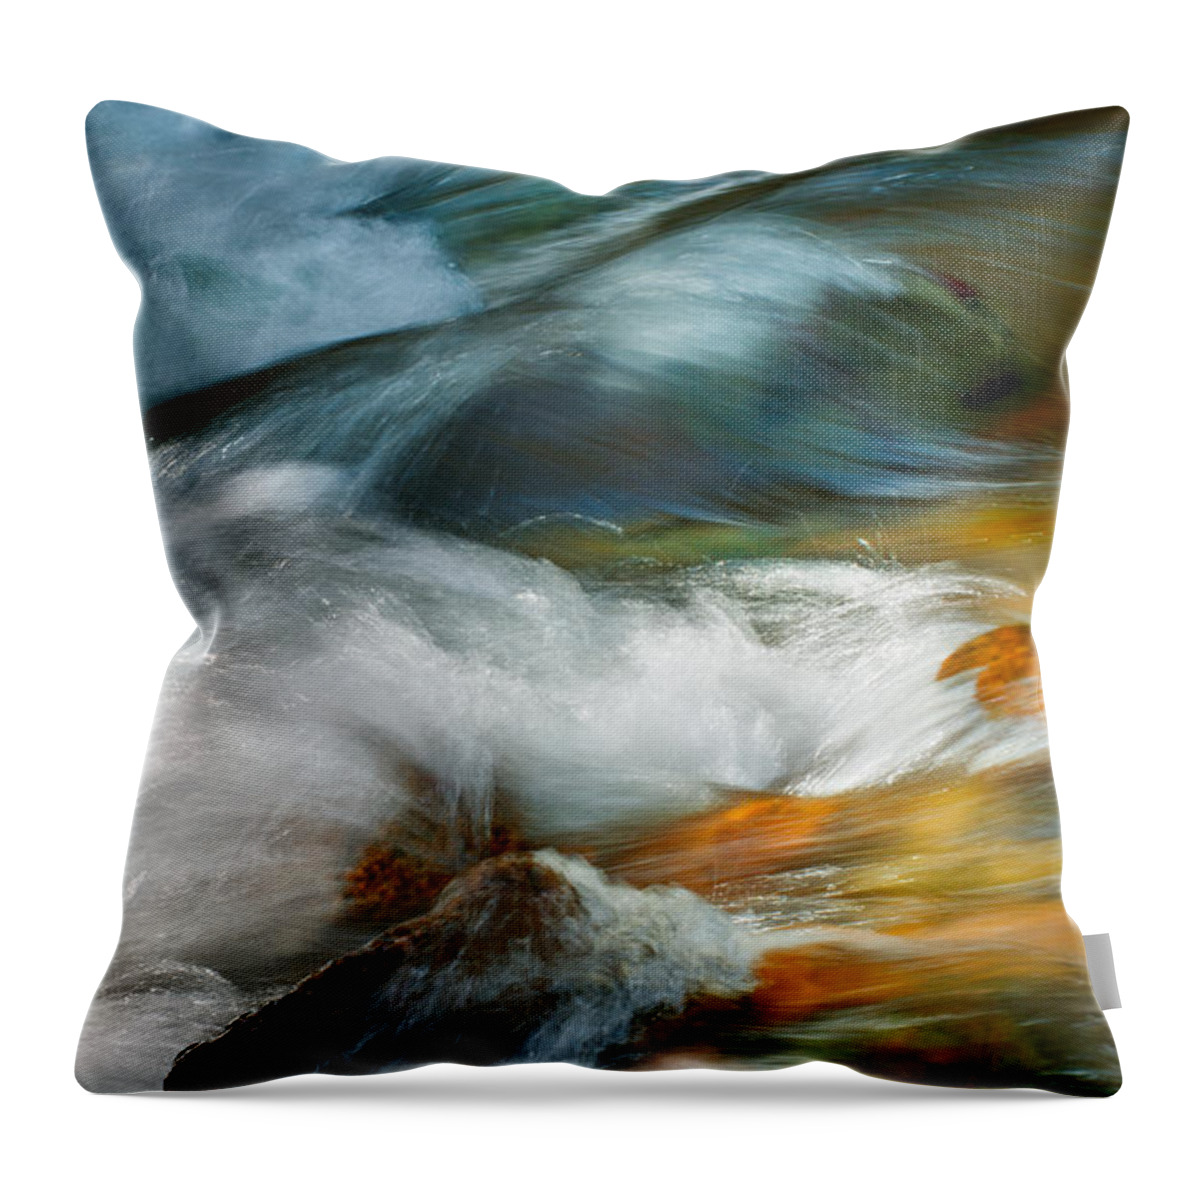 Water Throw Pillow featuring the photograph Jewels In The Stream by Tim Reaves